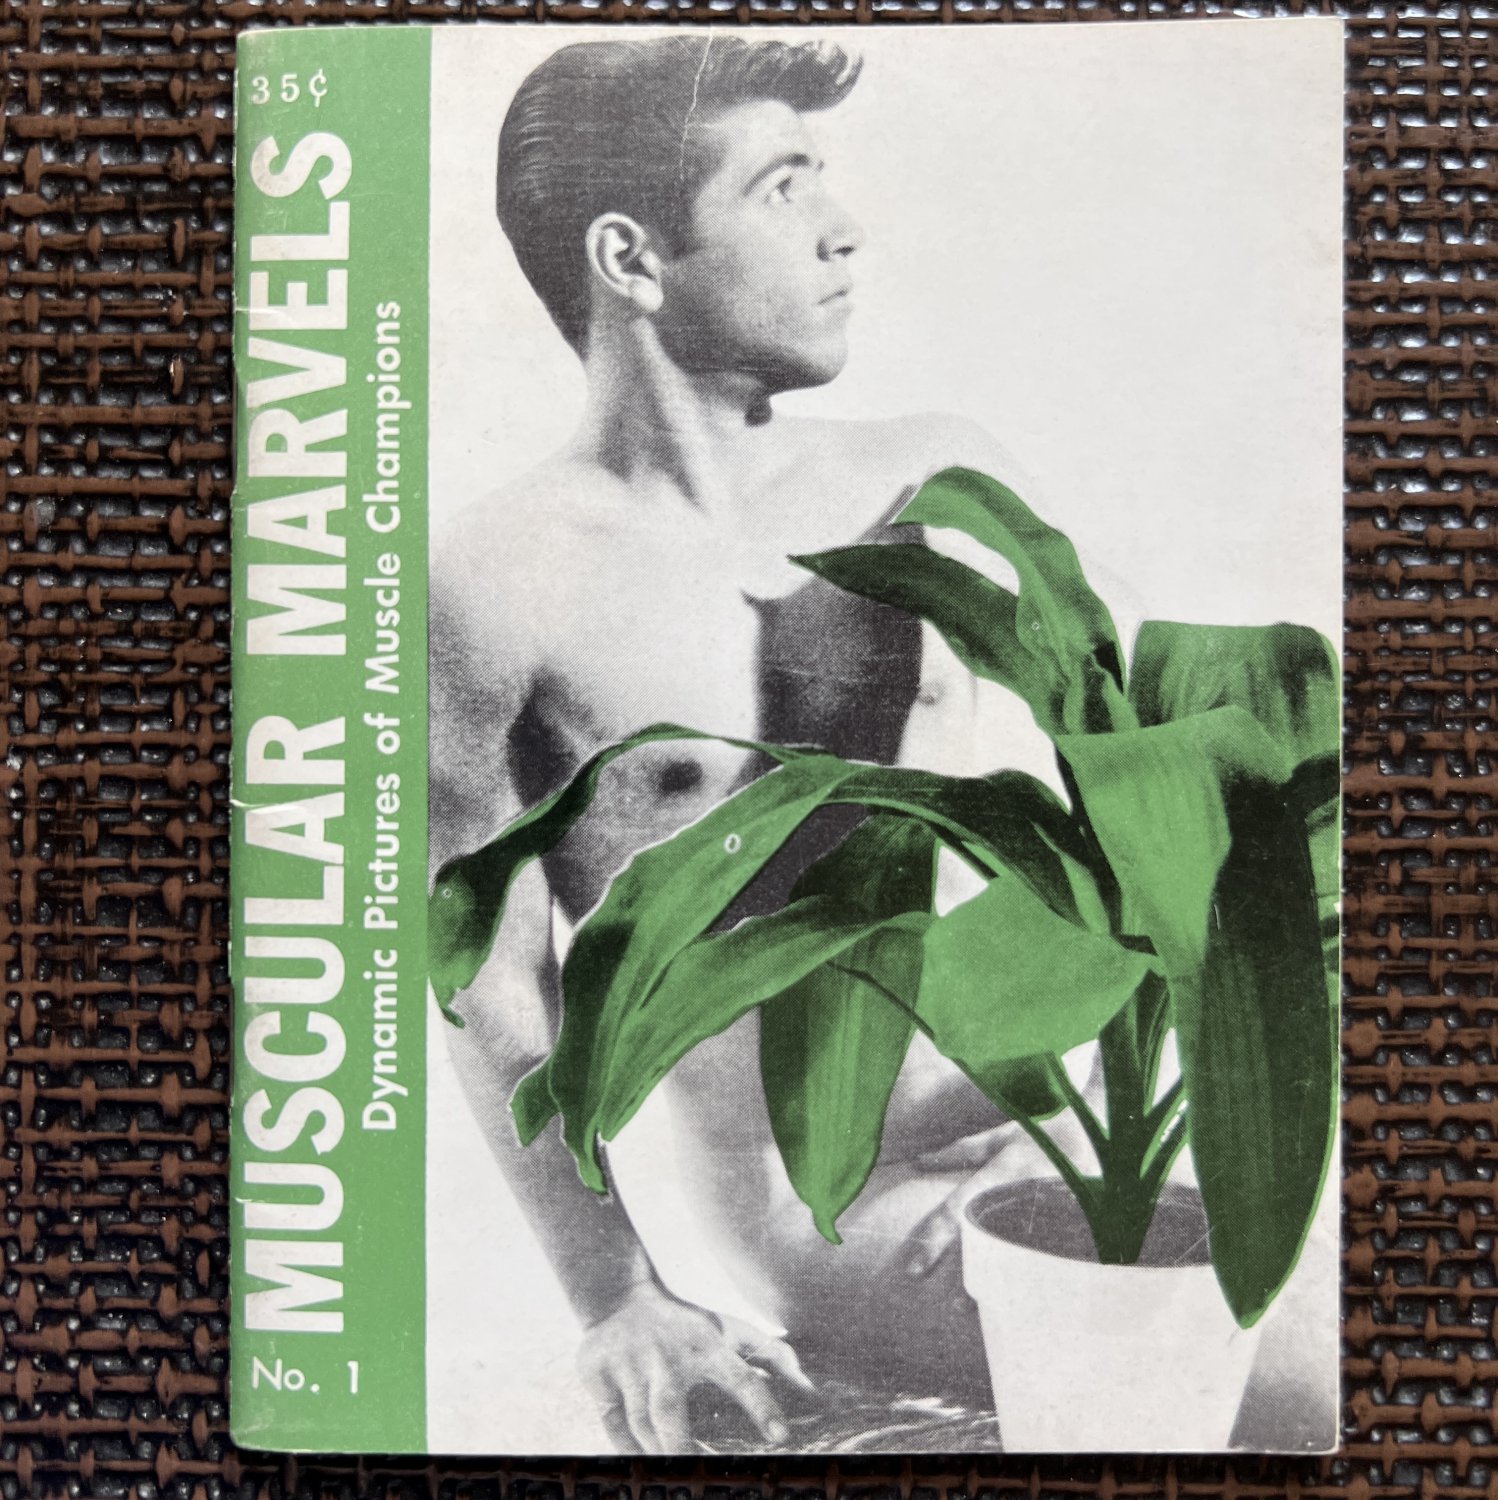 MUSCULAR MARVELS No.1 (1961) MUSCLE SCULPTURE Posing Strap Physique Photos Muscle Beefcake Male